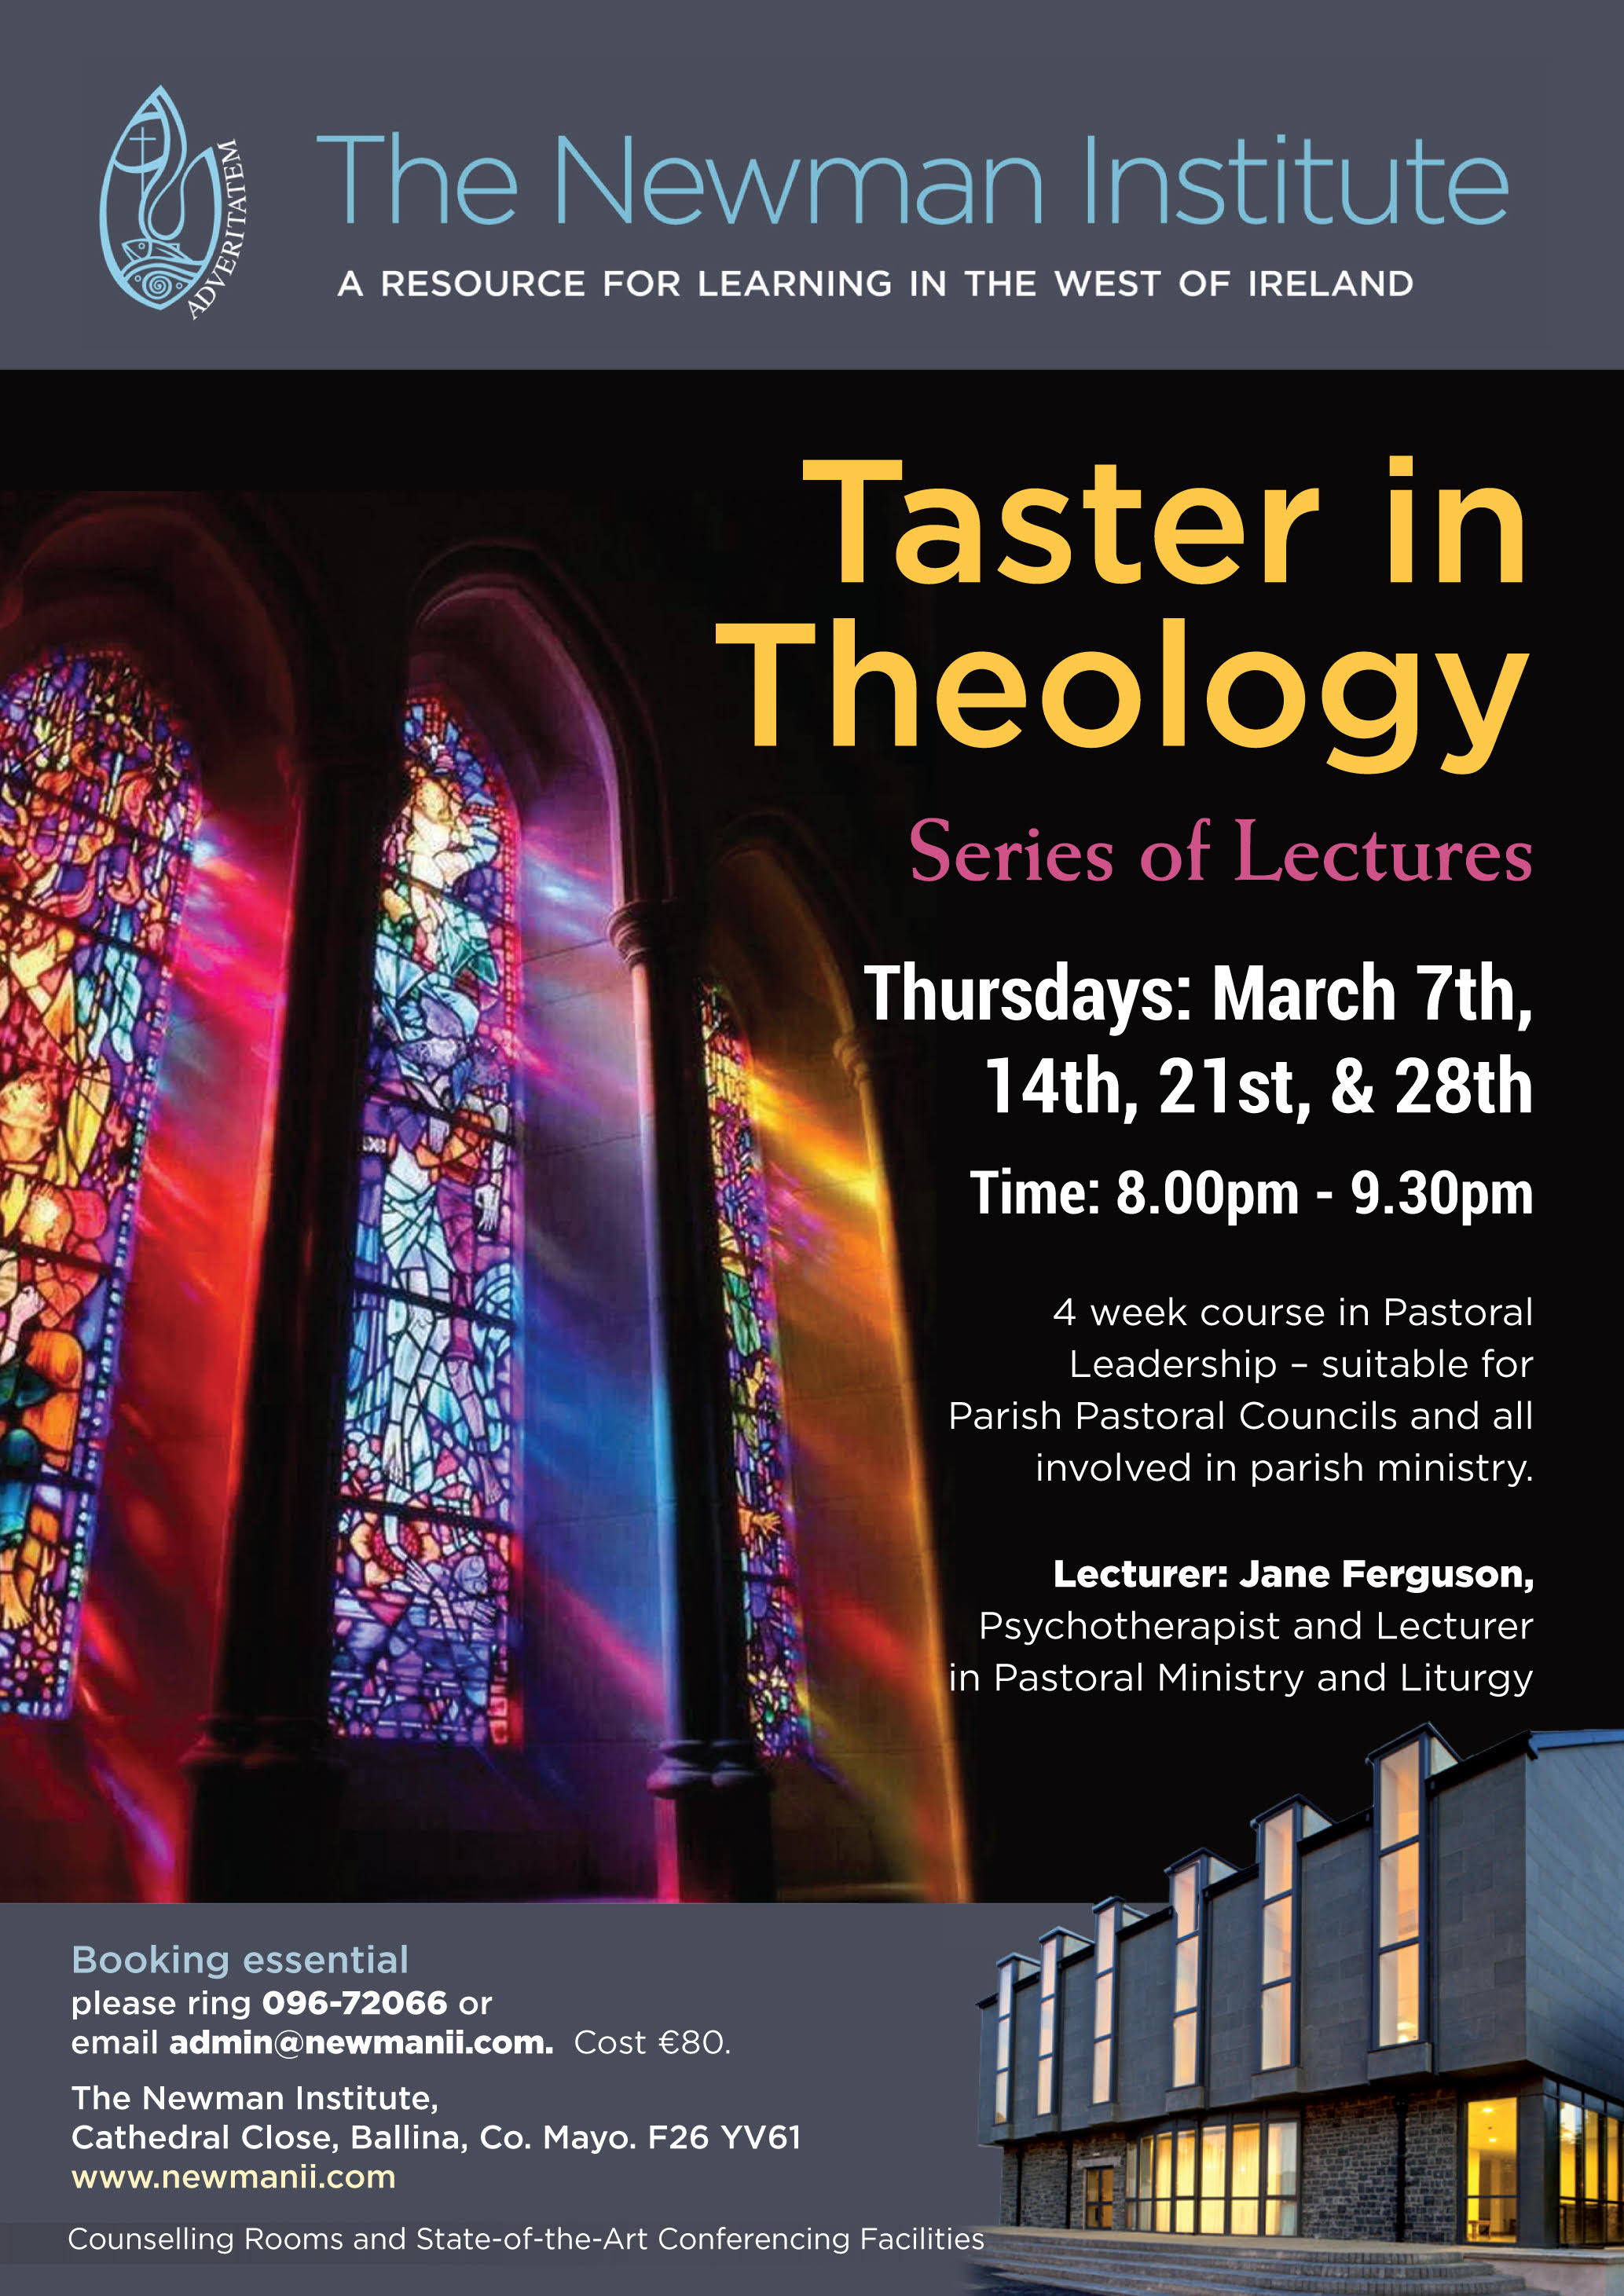 4 Week Course in Pastoral Leadership at Newman